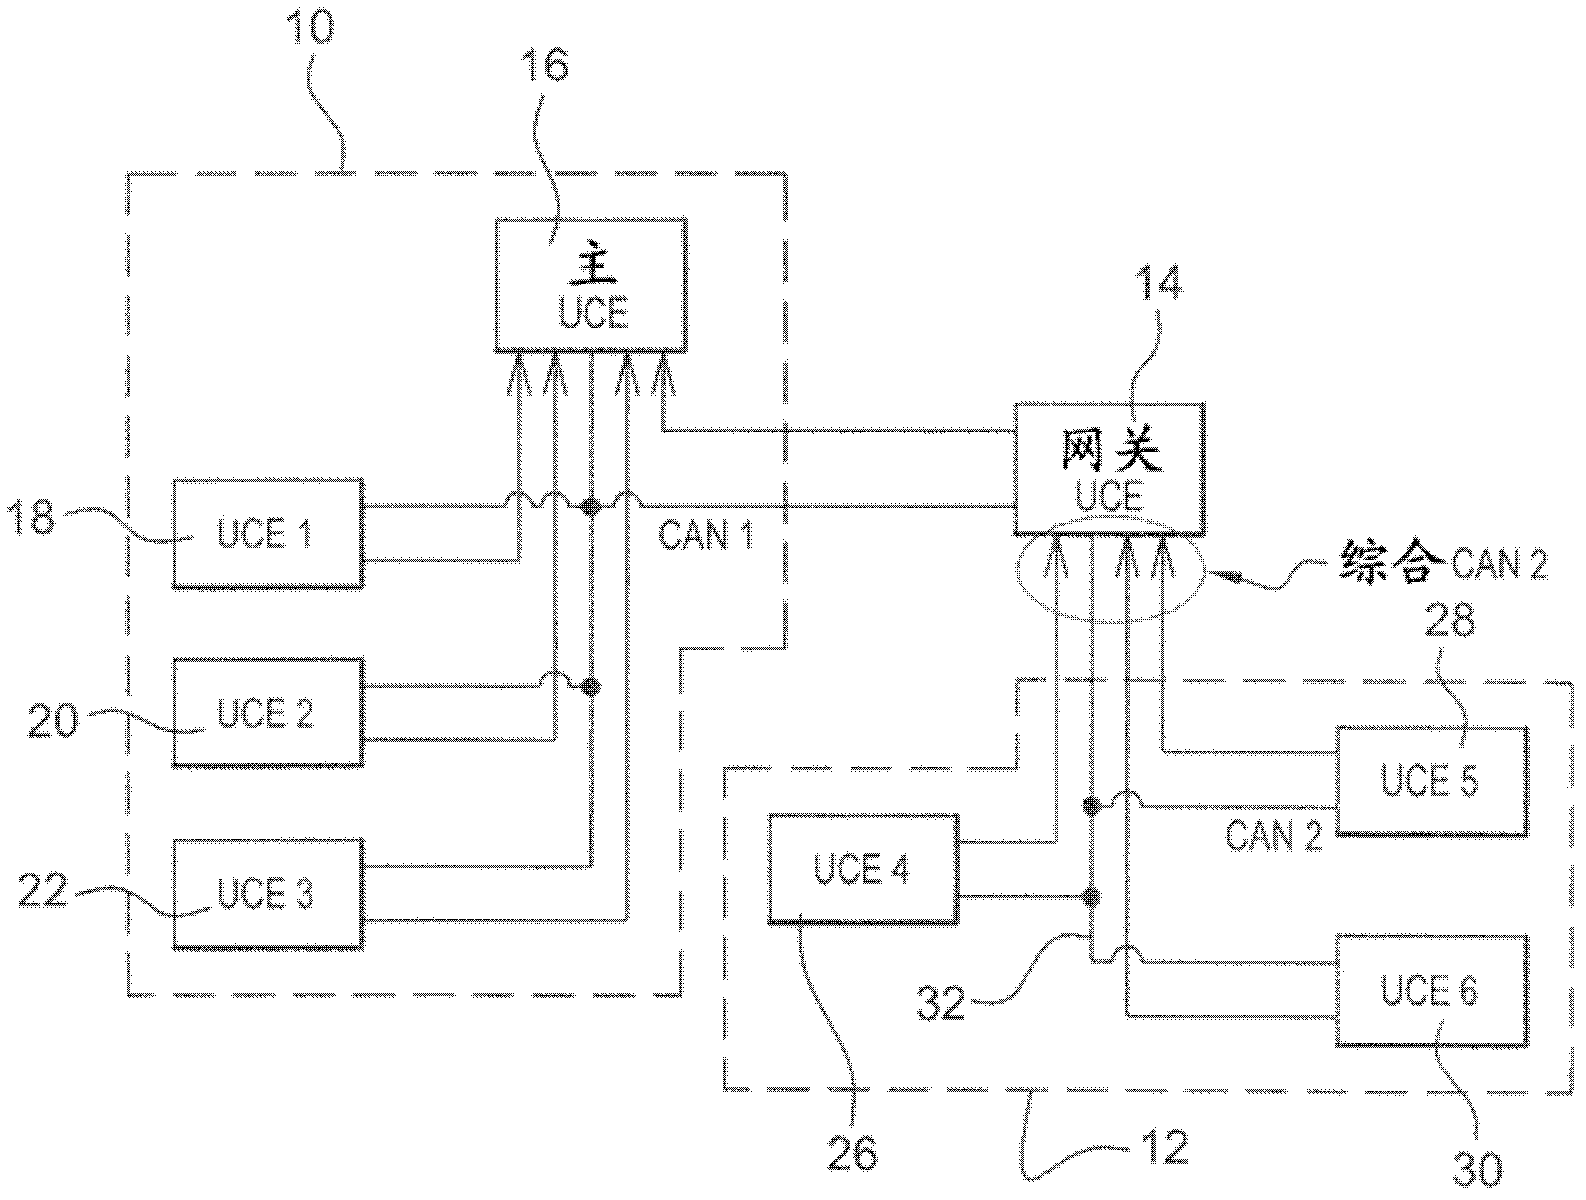 System for managing wakeup and sleep events of computers connected to a motor vehicle can network